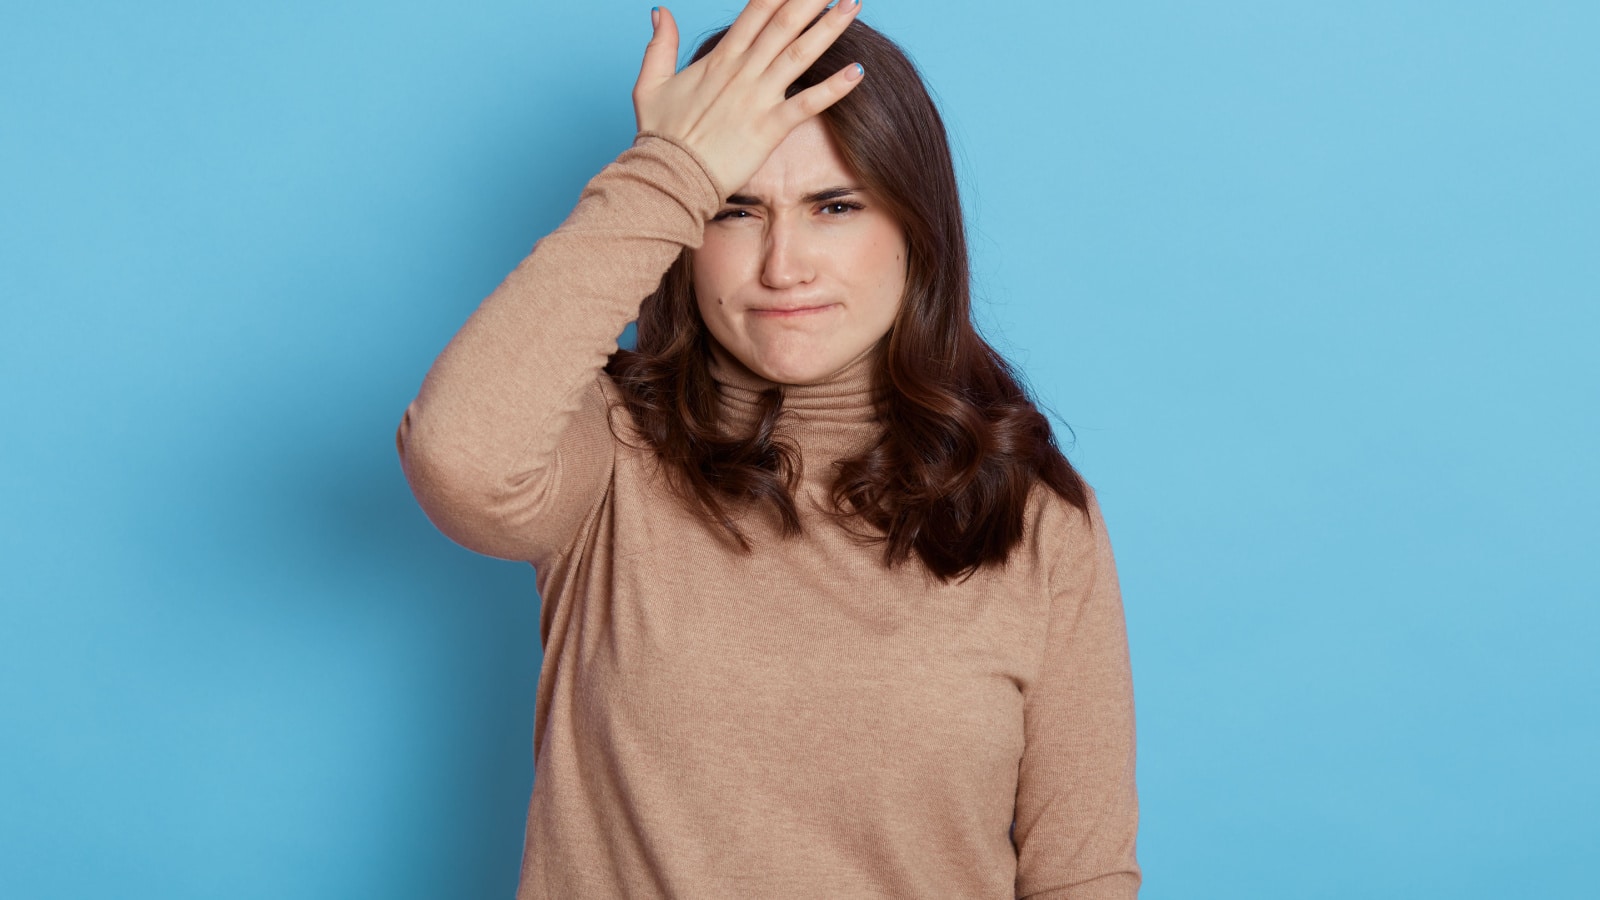 Disappointed woman keeps palm on forehead, regrets, did something wrong, having problematic situation, dressed in casual outfit, poses on blue wall, forgets about important task, lady with pursed lips